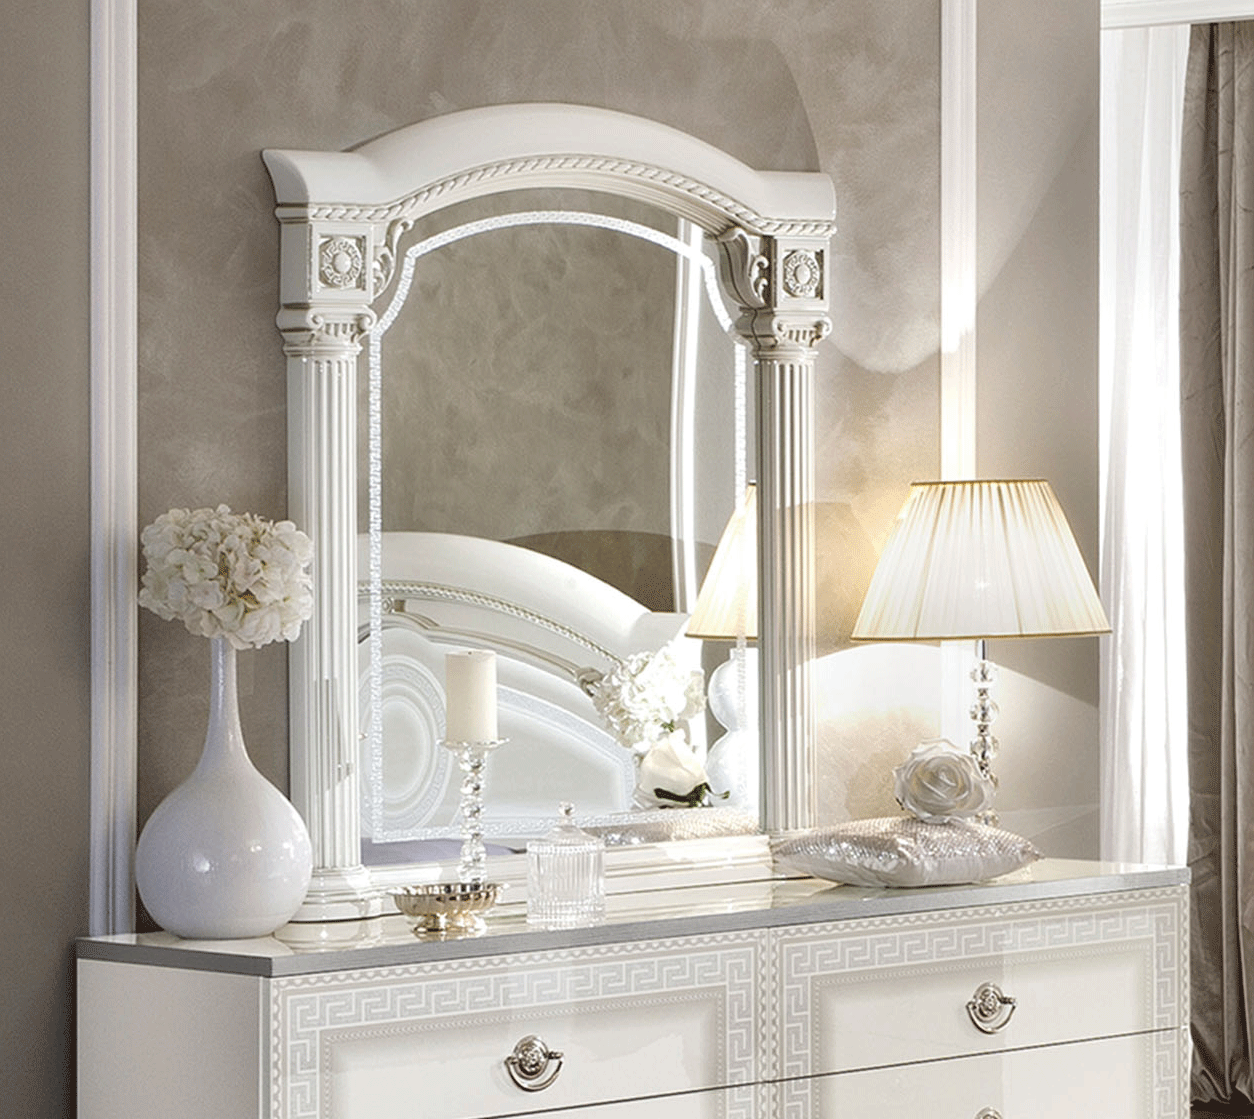 Bedroom Furniture Beds with storage Aida White/Silver mirror